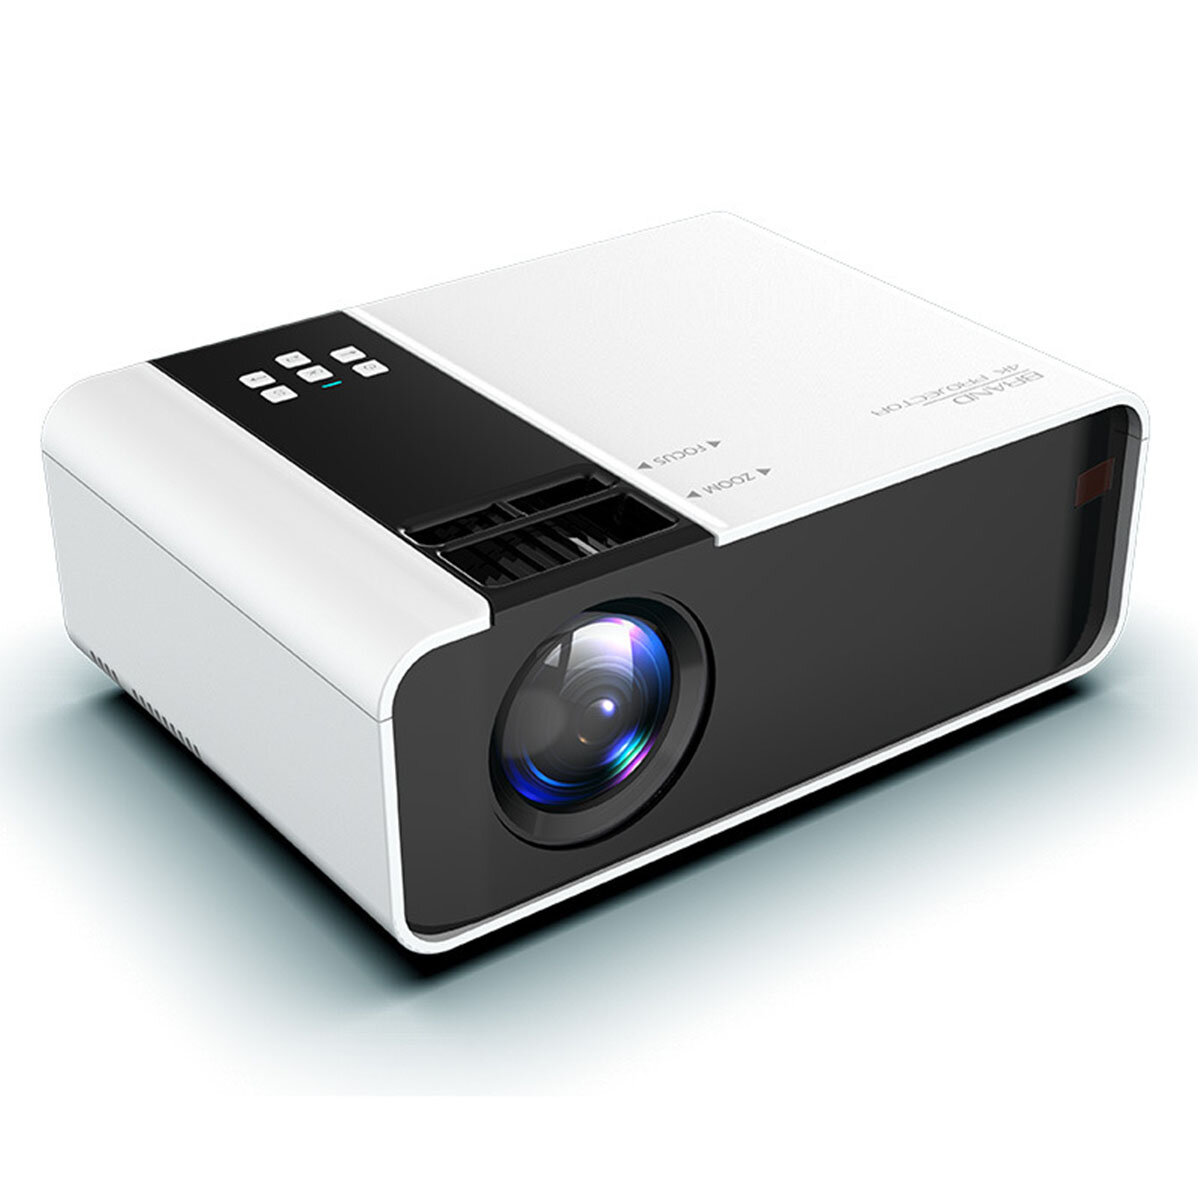 best price,g86,lcd,projector,4000lm,1080p,basic,discount